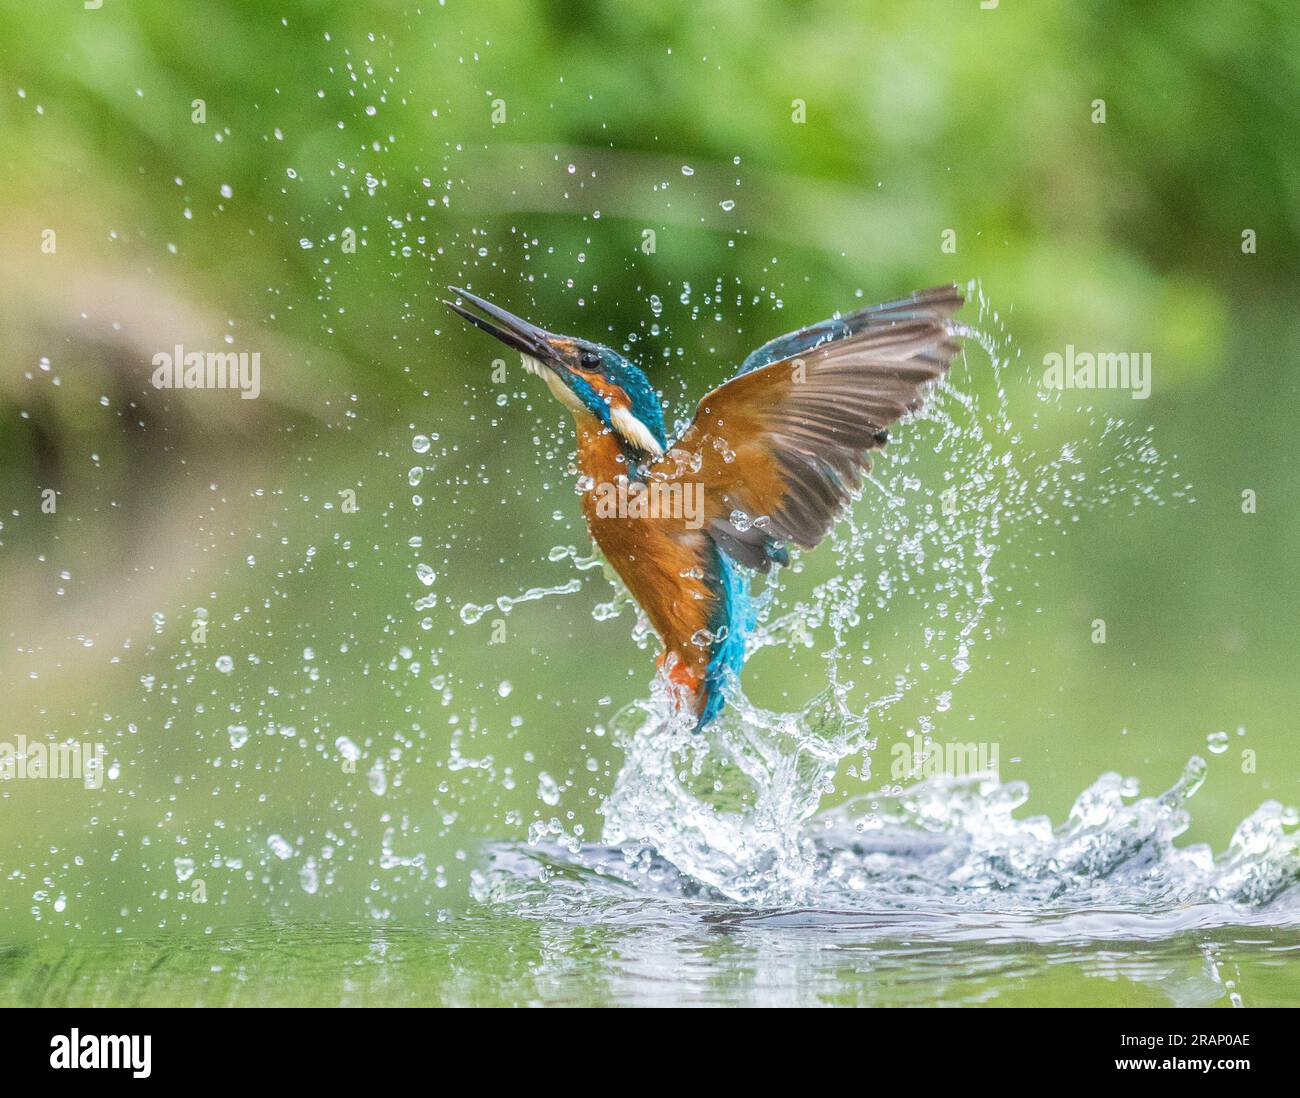 The kingfisher emerging from a dive BEDFORDSHIRE, ENGLAND STUNNING IMAGES taken by a dogwalker show a kingfisher smashing into water as it homed in on Stock Photo